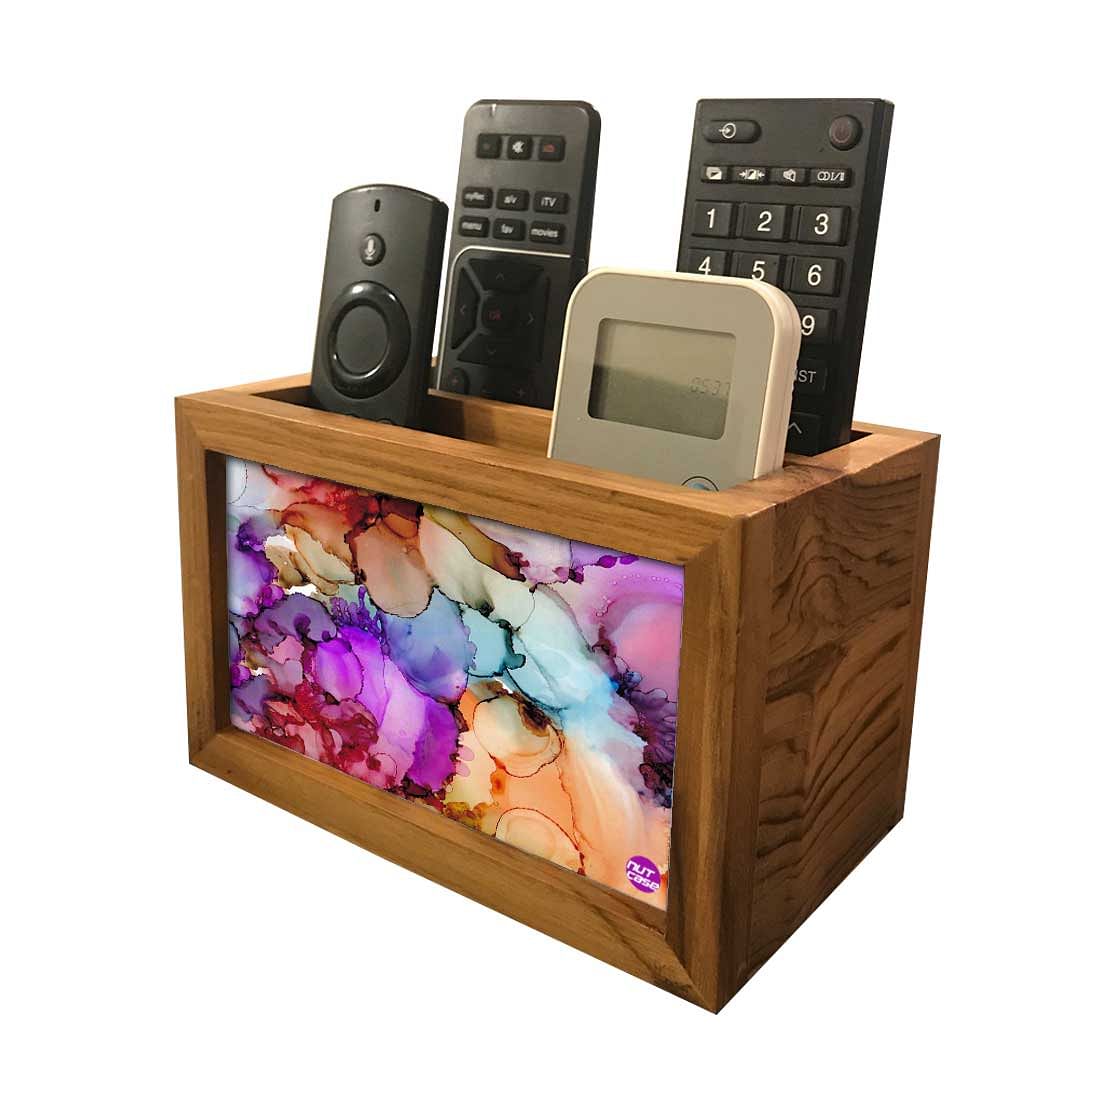 Remote Control Stand Holder Organizer For TV / AC Remotes -  Mix Watercolor Nutcase